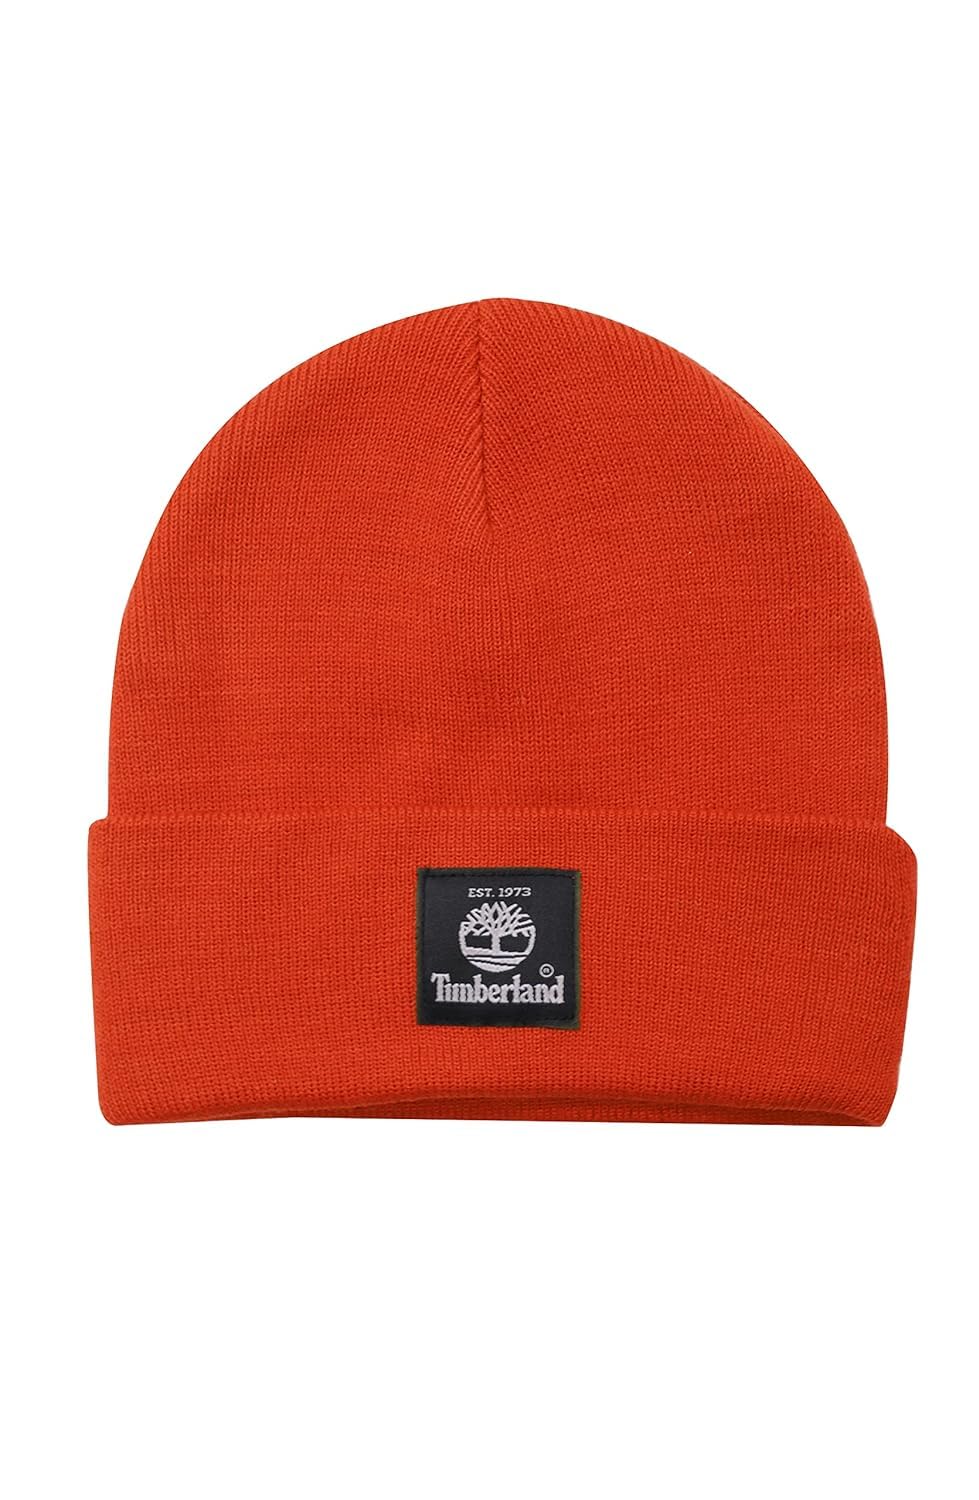 Timberland Men's or Women's Short Watch Beanie (Orange) $9.50 + Free Shipping w/ Prime or on $35+